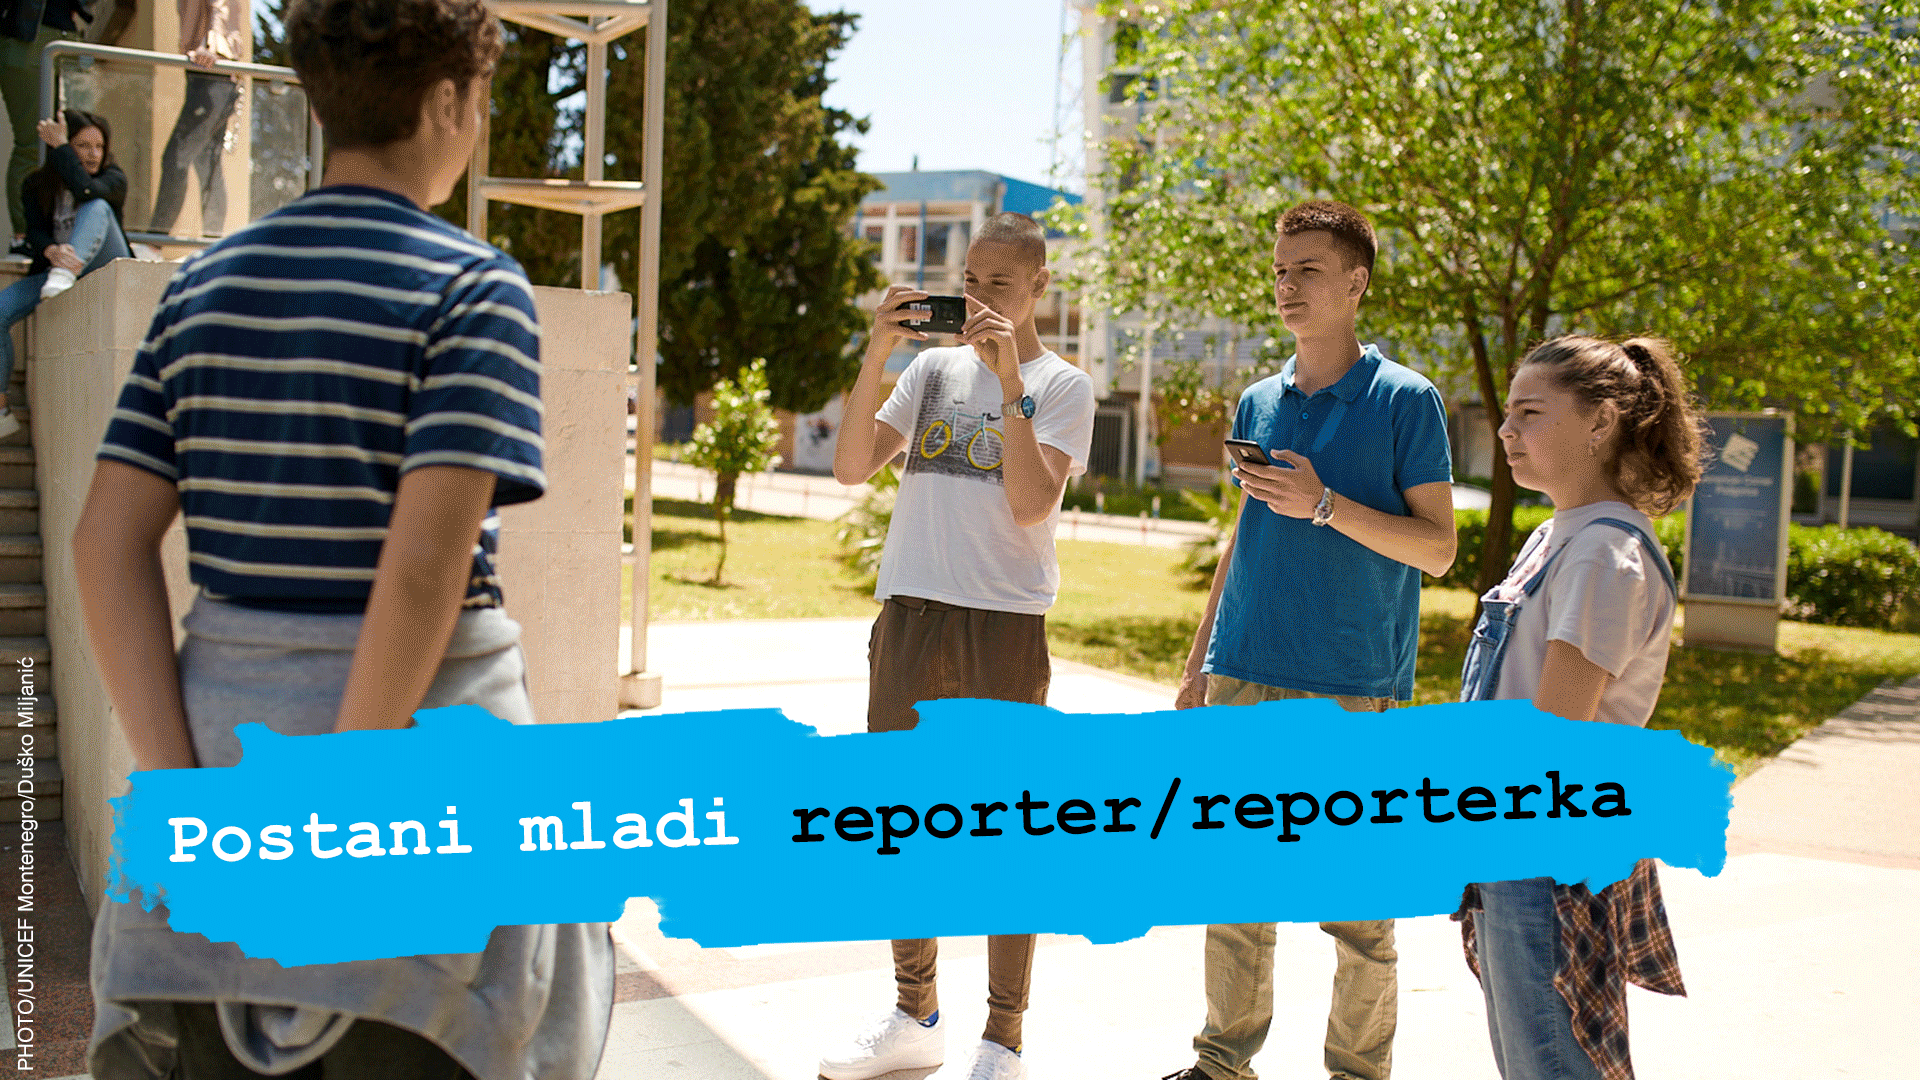 Become a young reporter